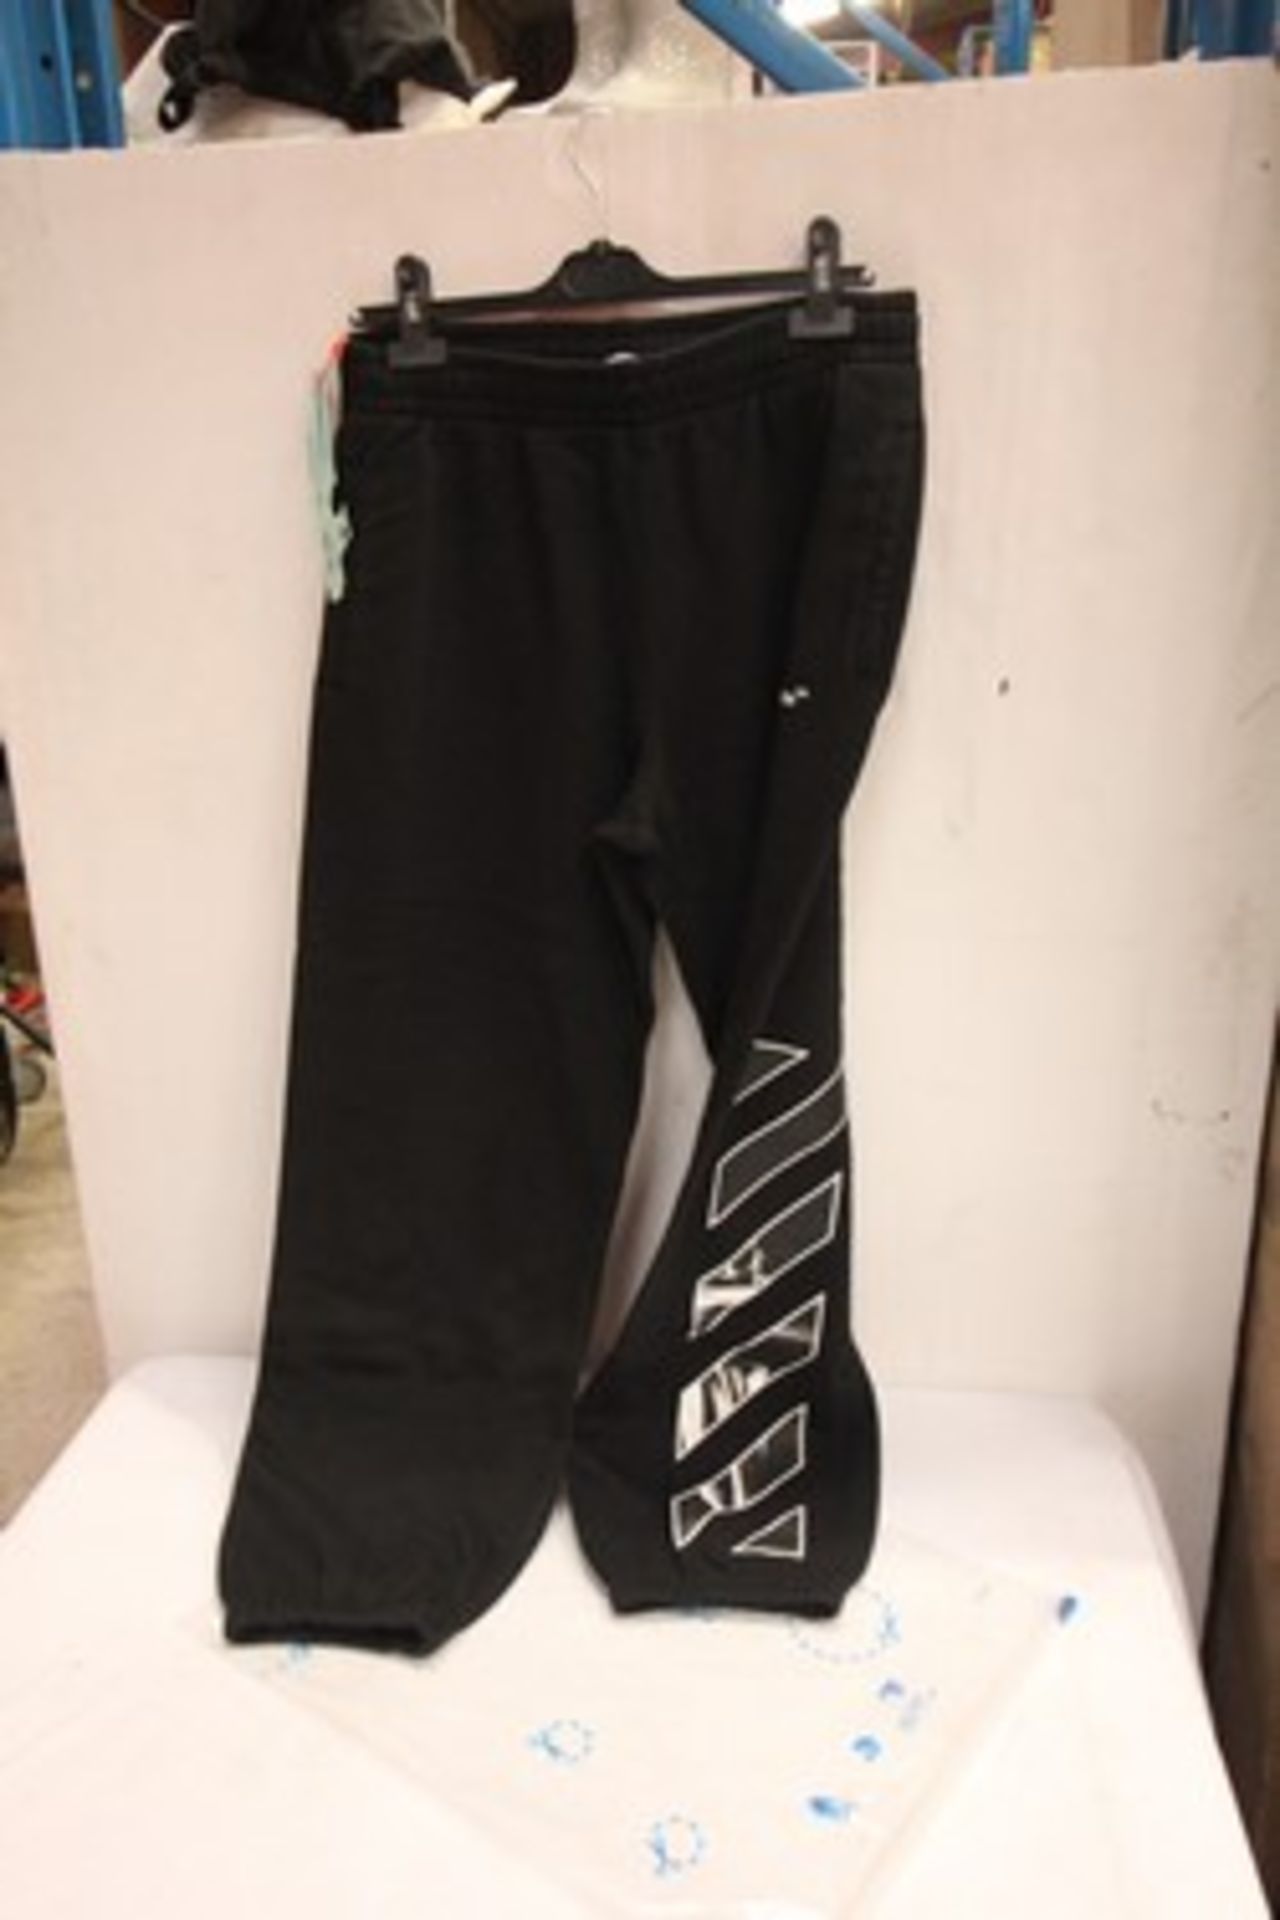 1 x pair of Off White black Caravag Diag slim sweat pants, size L - New with tags (E2A)